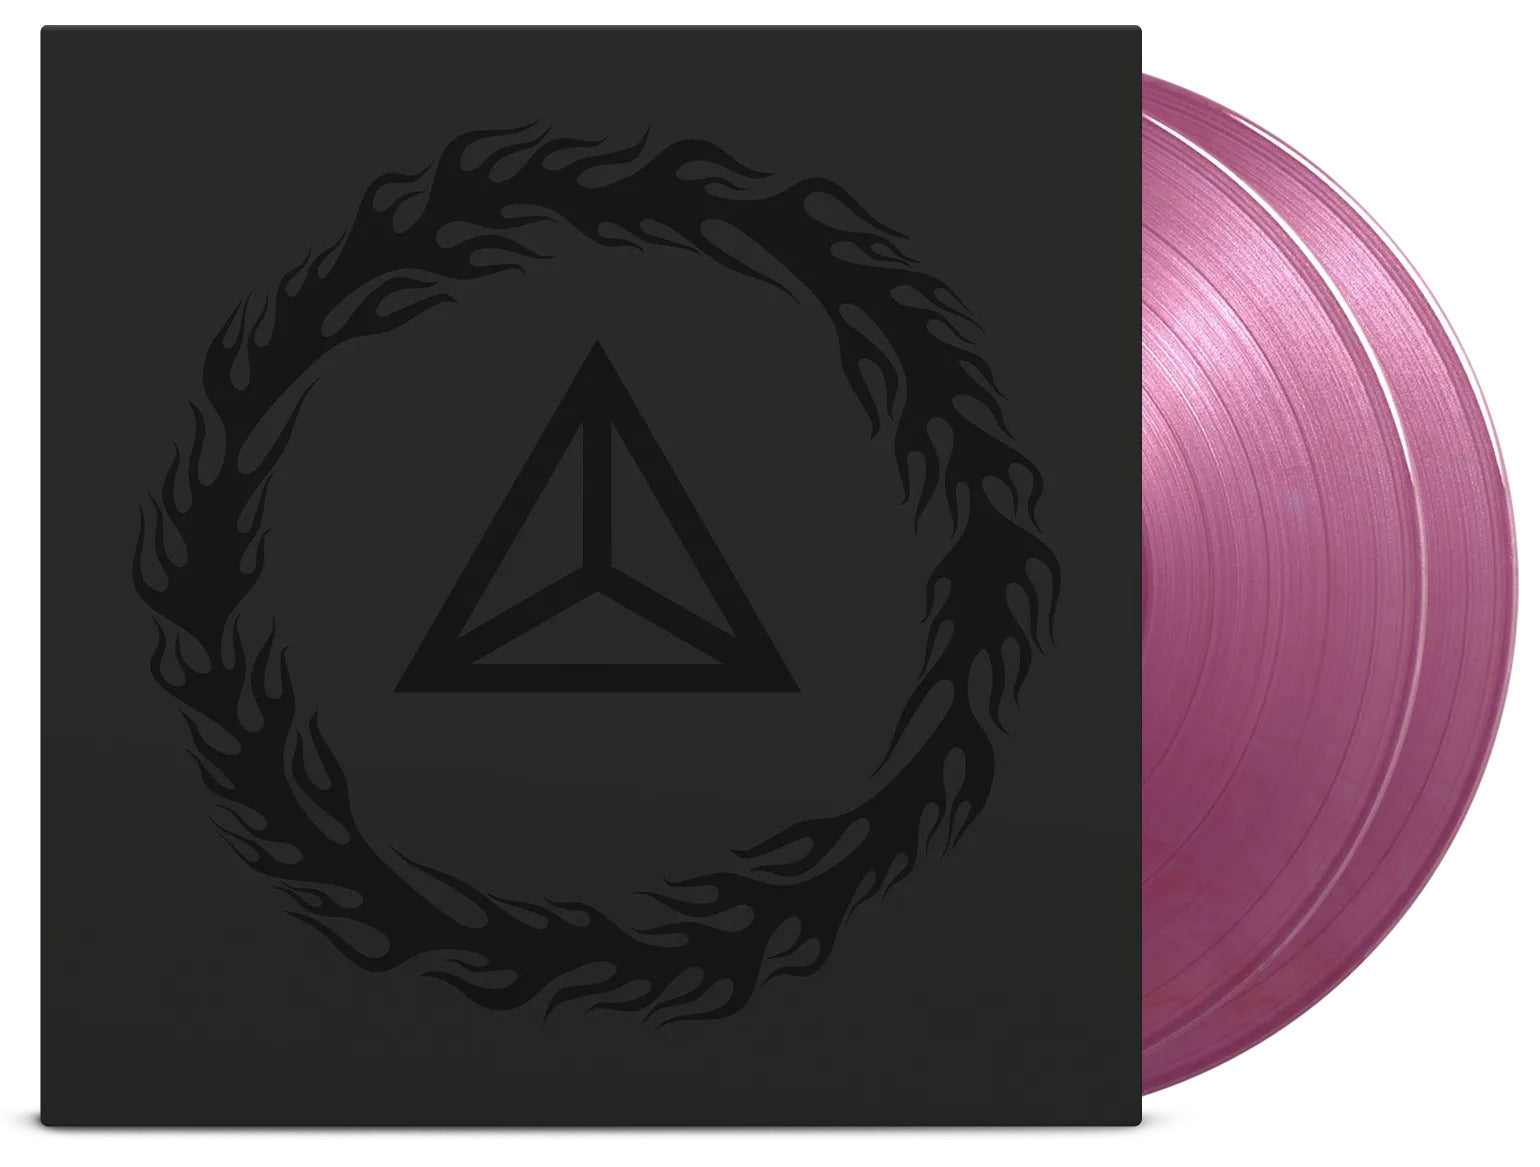 Mudvayne "The End Of All Things To Come" Gatefold 2x12" Purple Marbled Vinyl - PRE-ORDER